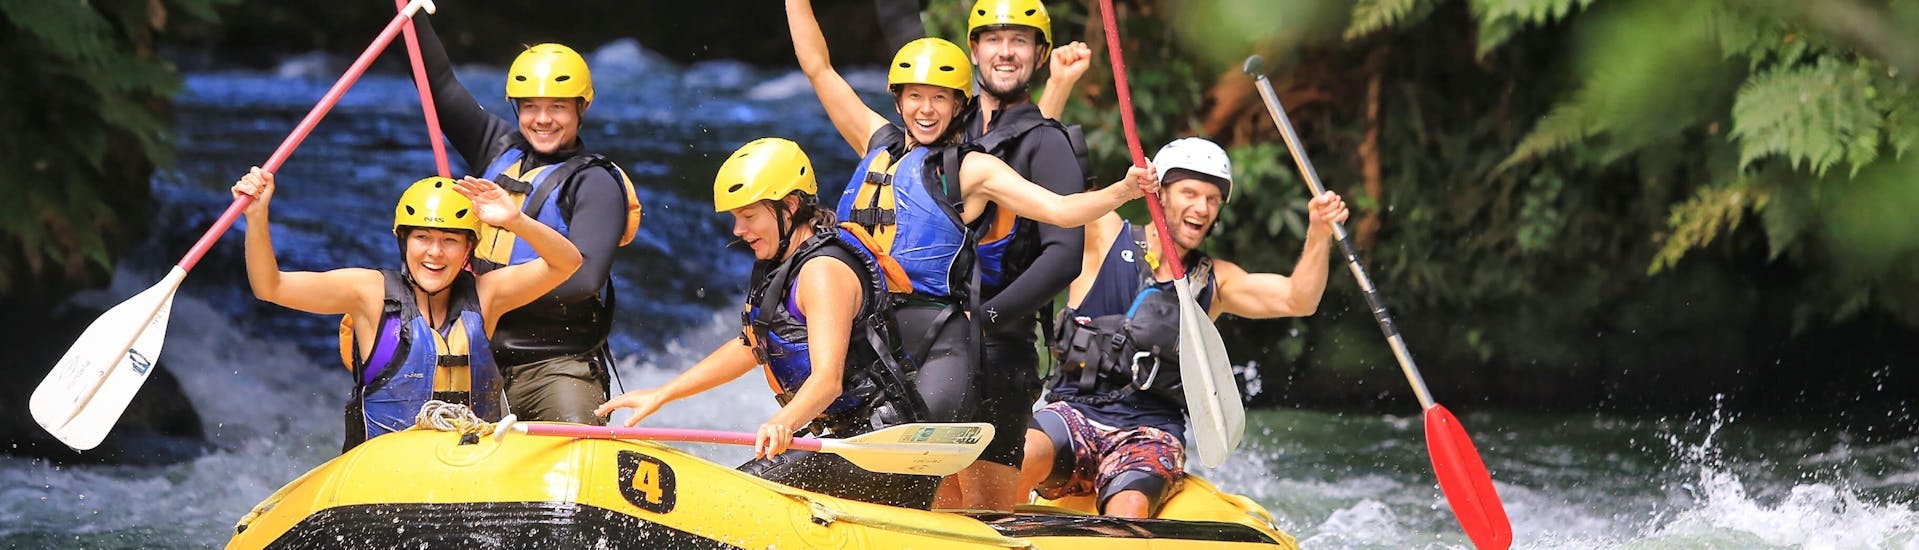 While Rafting on Kaituna River with pick-up in Rotorua, a group of friends is having a great time on the river with Rotorua Rafting.